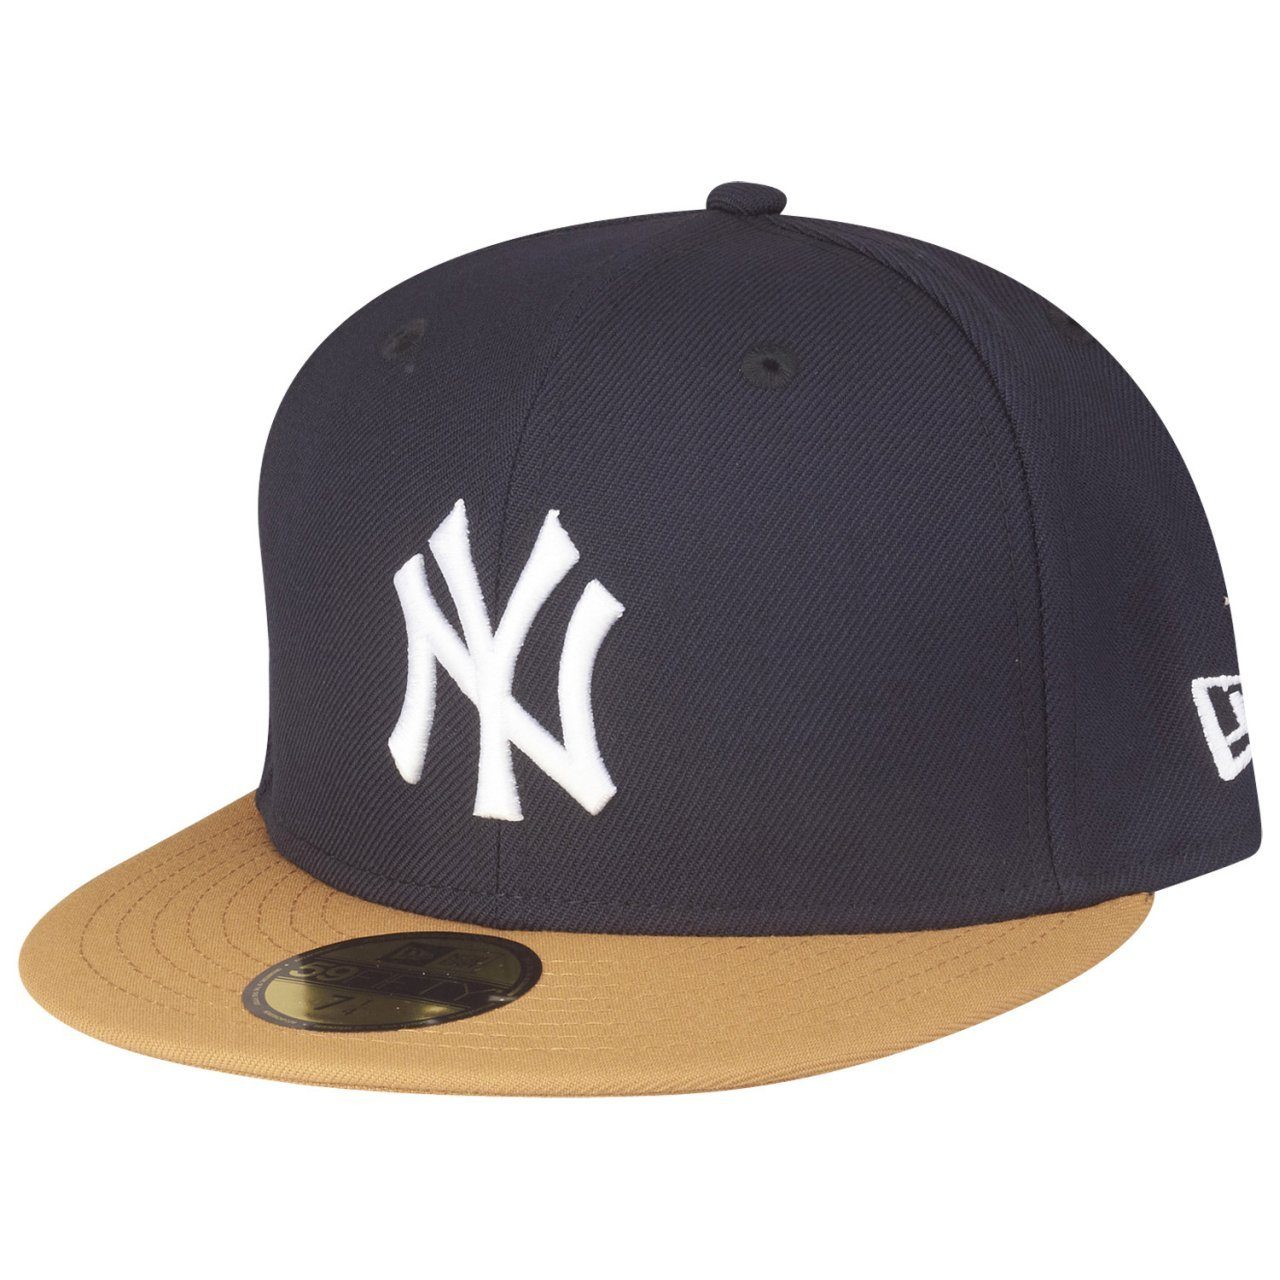 York Fitted MLB Cap New Yankees Era New 59Fifty